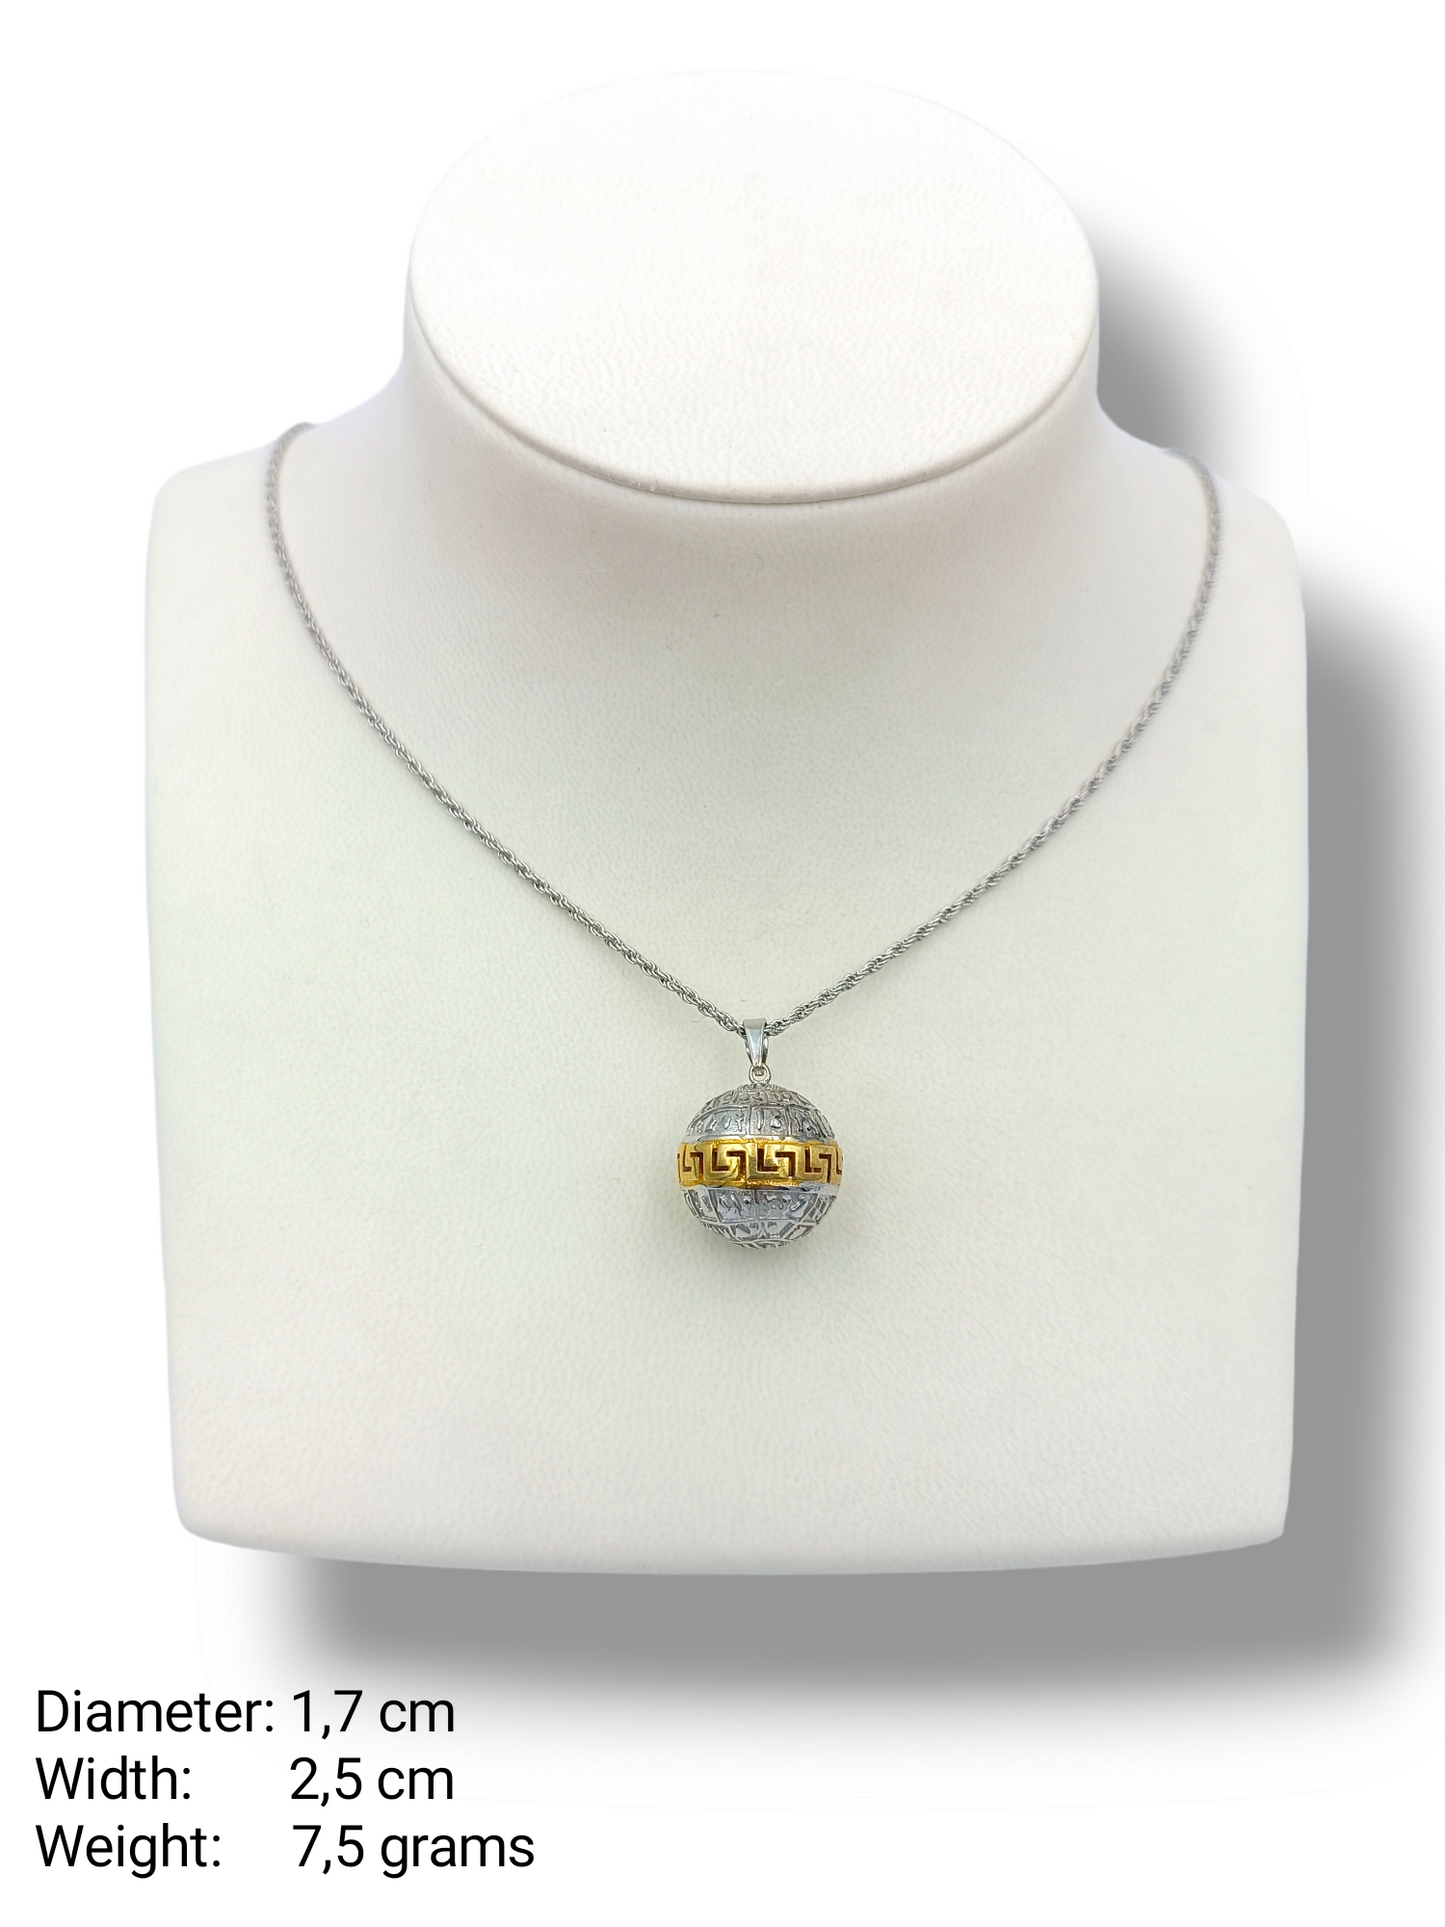 Silver round Disc of Phaistos pendant with Meander design